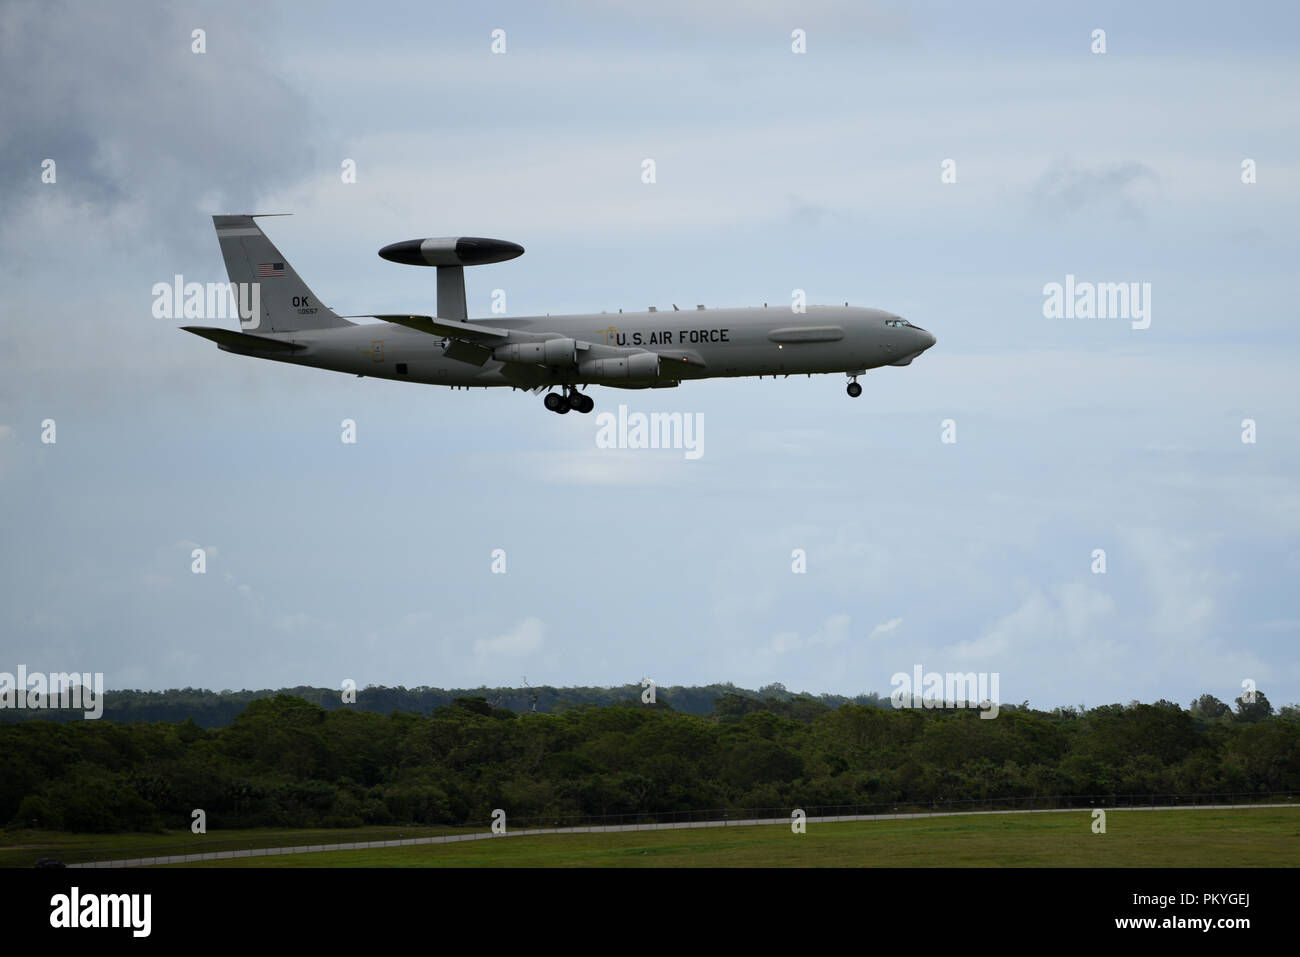 A U.S. Air Force E-3 Sentry touches down on Andersen Air Force Base, Guam, Sept. 12th, 2018. The aircraft is set to participate in exercise Valiant Shield 2018. Valiant Shield is a biennial, U.S. only, field training exercise with a focus on integration of joint training among U.S. forces. (U.S. Air Force photo by Senior Airmen Gerald R. Willis) Stock Photo